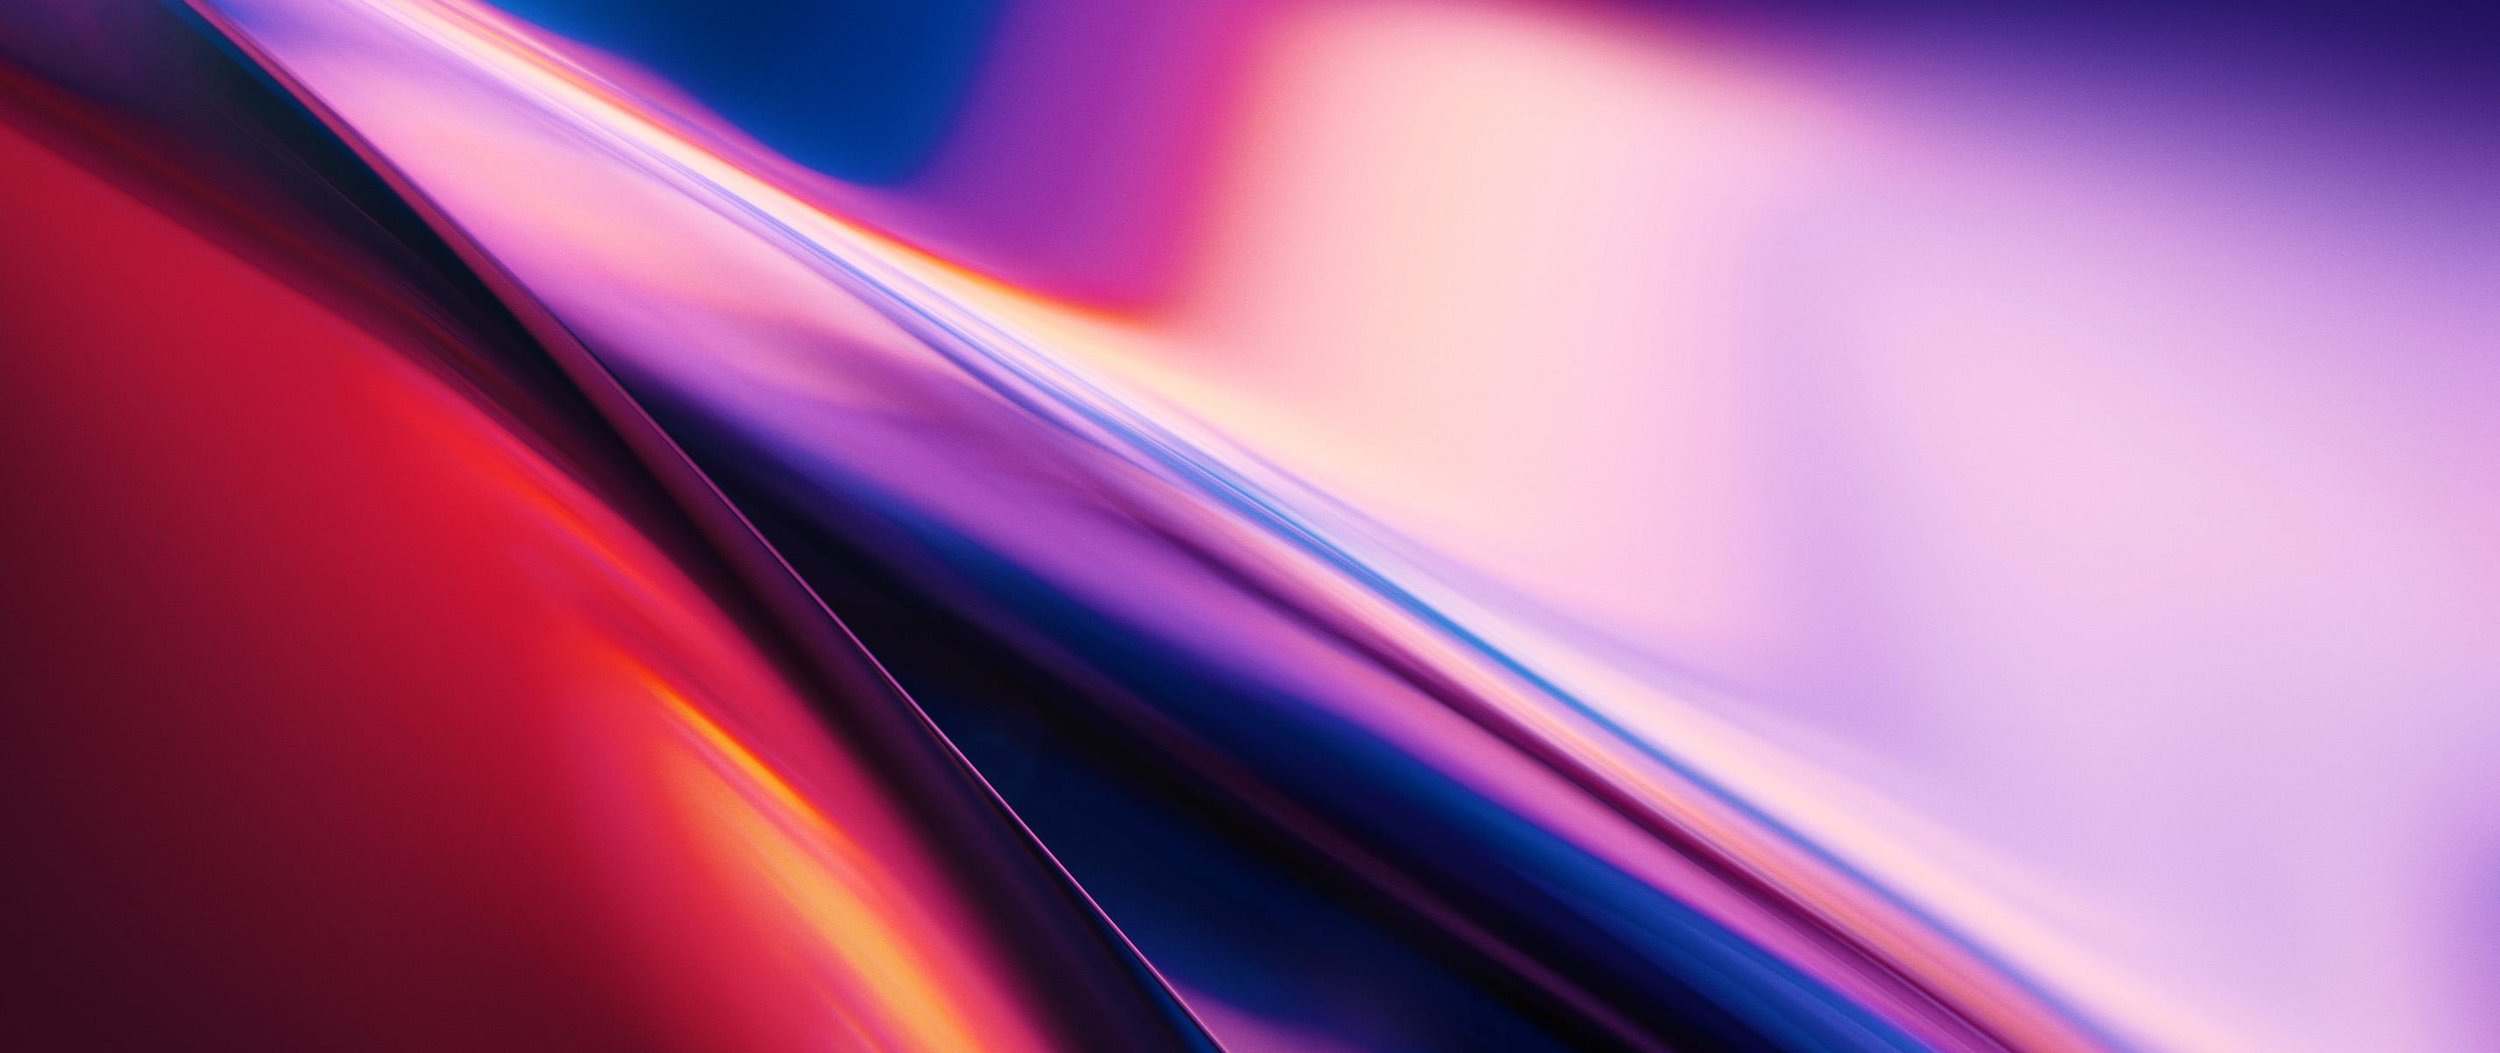 Oneplus 7 Series & Abstruct Wallpaper App Released , HD Wallpaper & Backgrounds